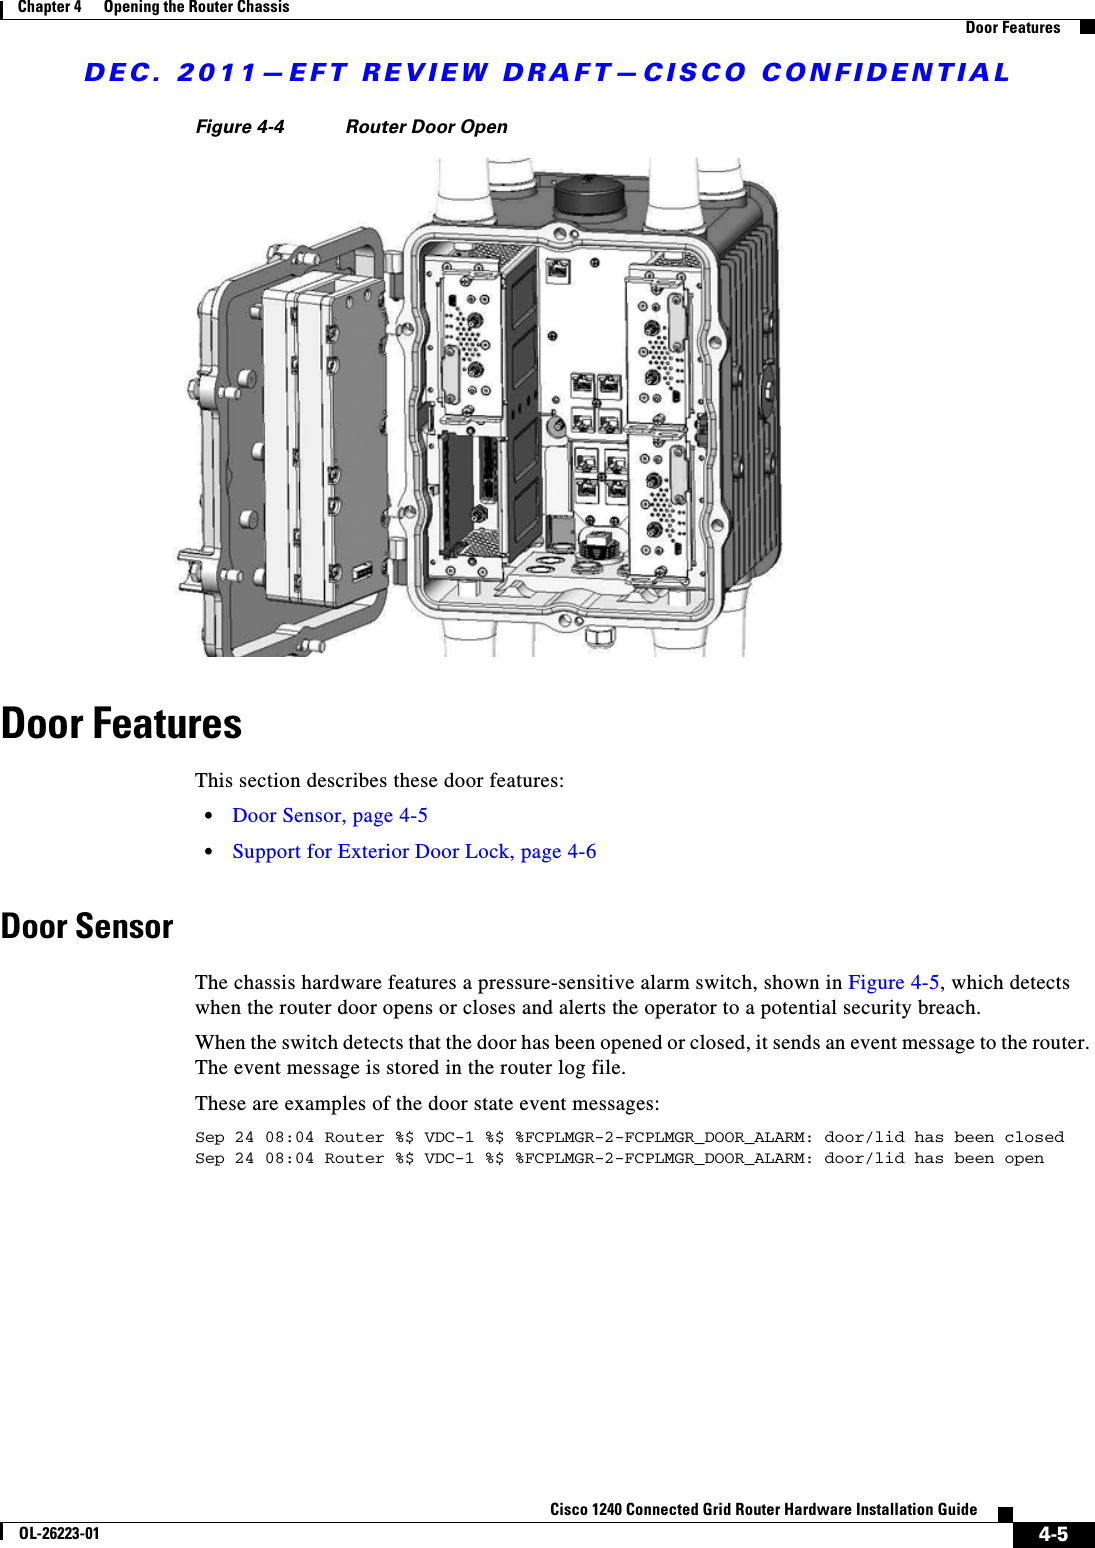 DEC. 2011—EFT REVIEW DRAFT—CISCO CONFIDENTIAL4-5Cisco 1240 Connected Grid Router Hardware Installation GuideOL-26223-01Chapter 4      Opening the Router Chassis  Door FeaturesFigure 4-4 Router Door OpenDoor FeaturesThis section describes these door features:  • Door Sensor, page 4-5  • Support for Exterior Door Lock, page 4-6Door SensorThe chassis hardware features a pressure-sensitive alarm switch, shown in Figure 4-5, which detects when the router door opens or closes and alerts the operator to a potential security breach.When the switch detects that the door has been opened or closed, it sends an event message to the router. The event message is stored in the router log file. These are examples of the door state event messages:Sep 24 08:04 Router %$ VDC-1 %$ %FCPLMGR-2-FCPLMGR_DOOR_ALARM: door/lid has been closedSep 24 08:04 Router %$ VDC-1 %$ %FCPLMGR-2-FCPLMGR_DOOR_ALARM: door/lid has been open